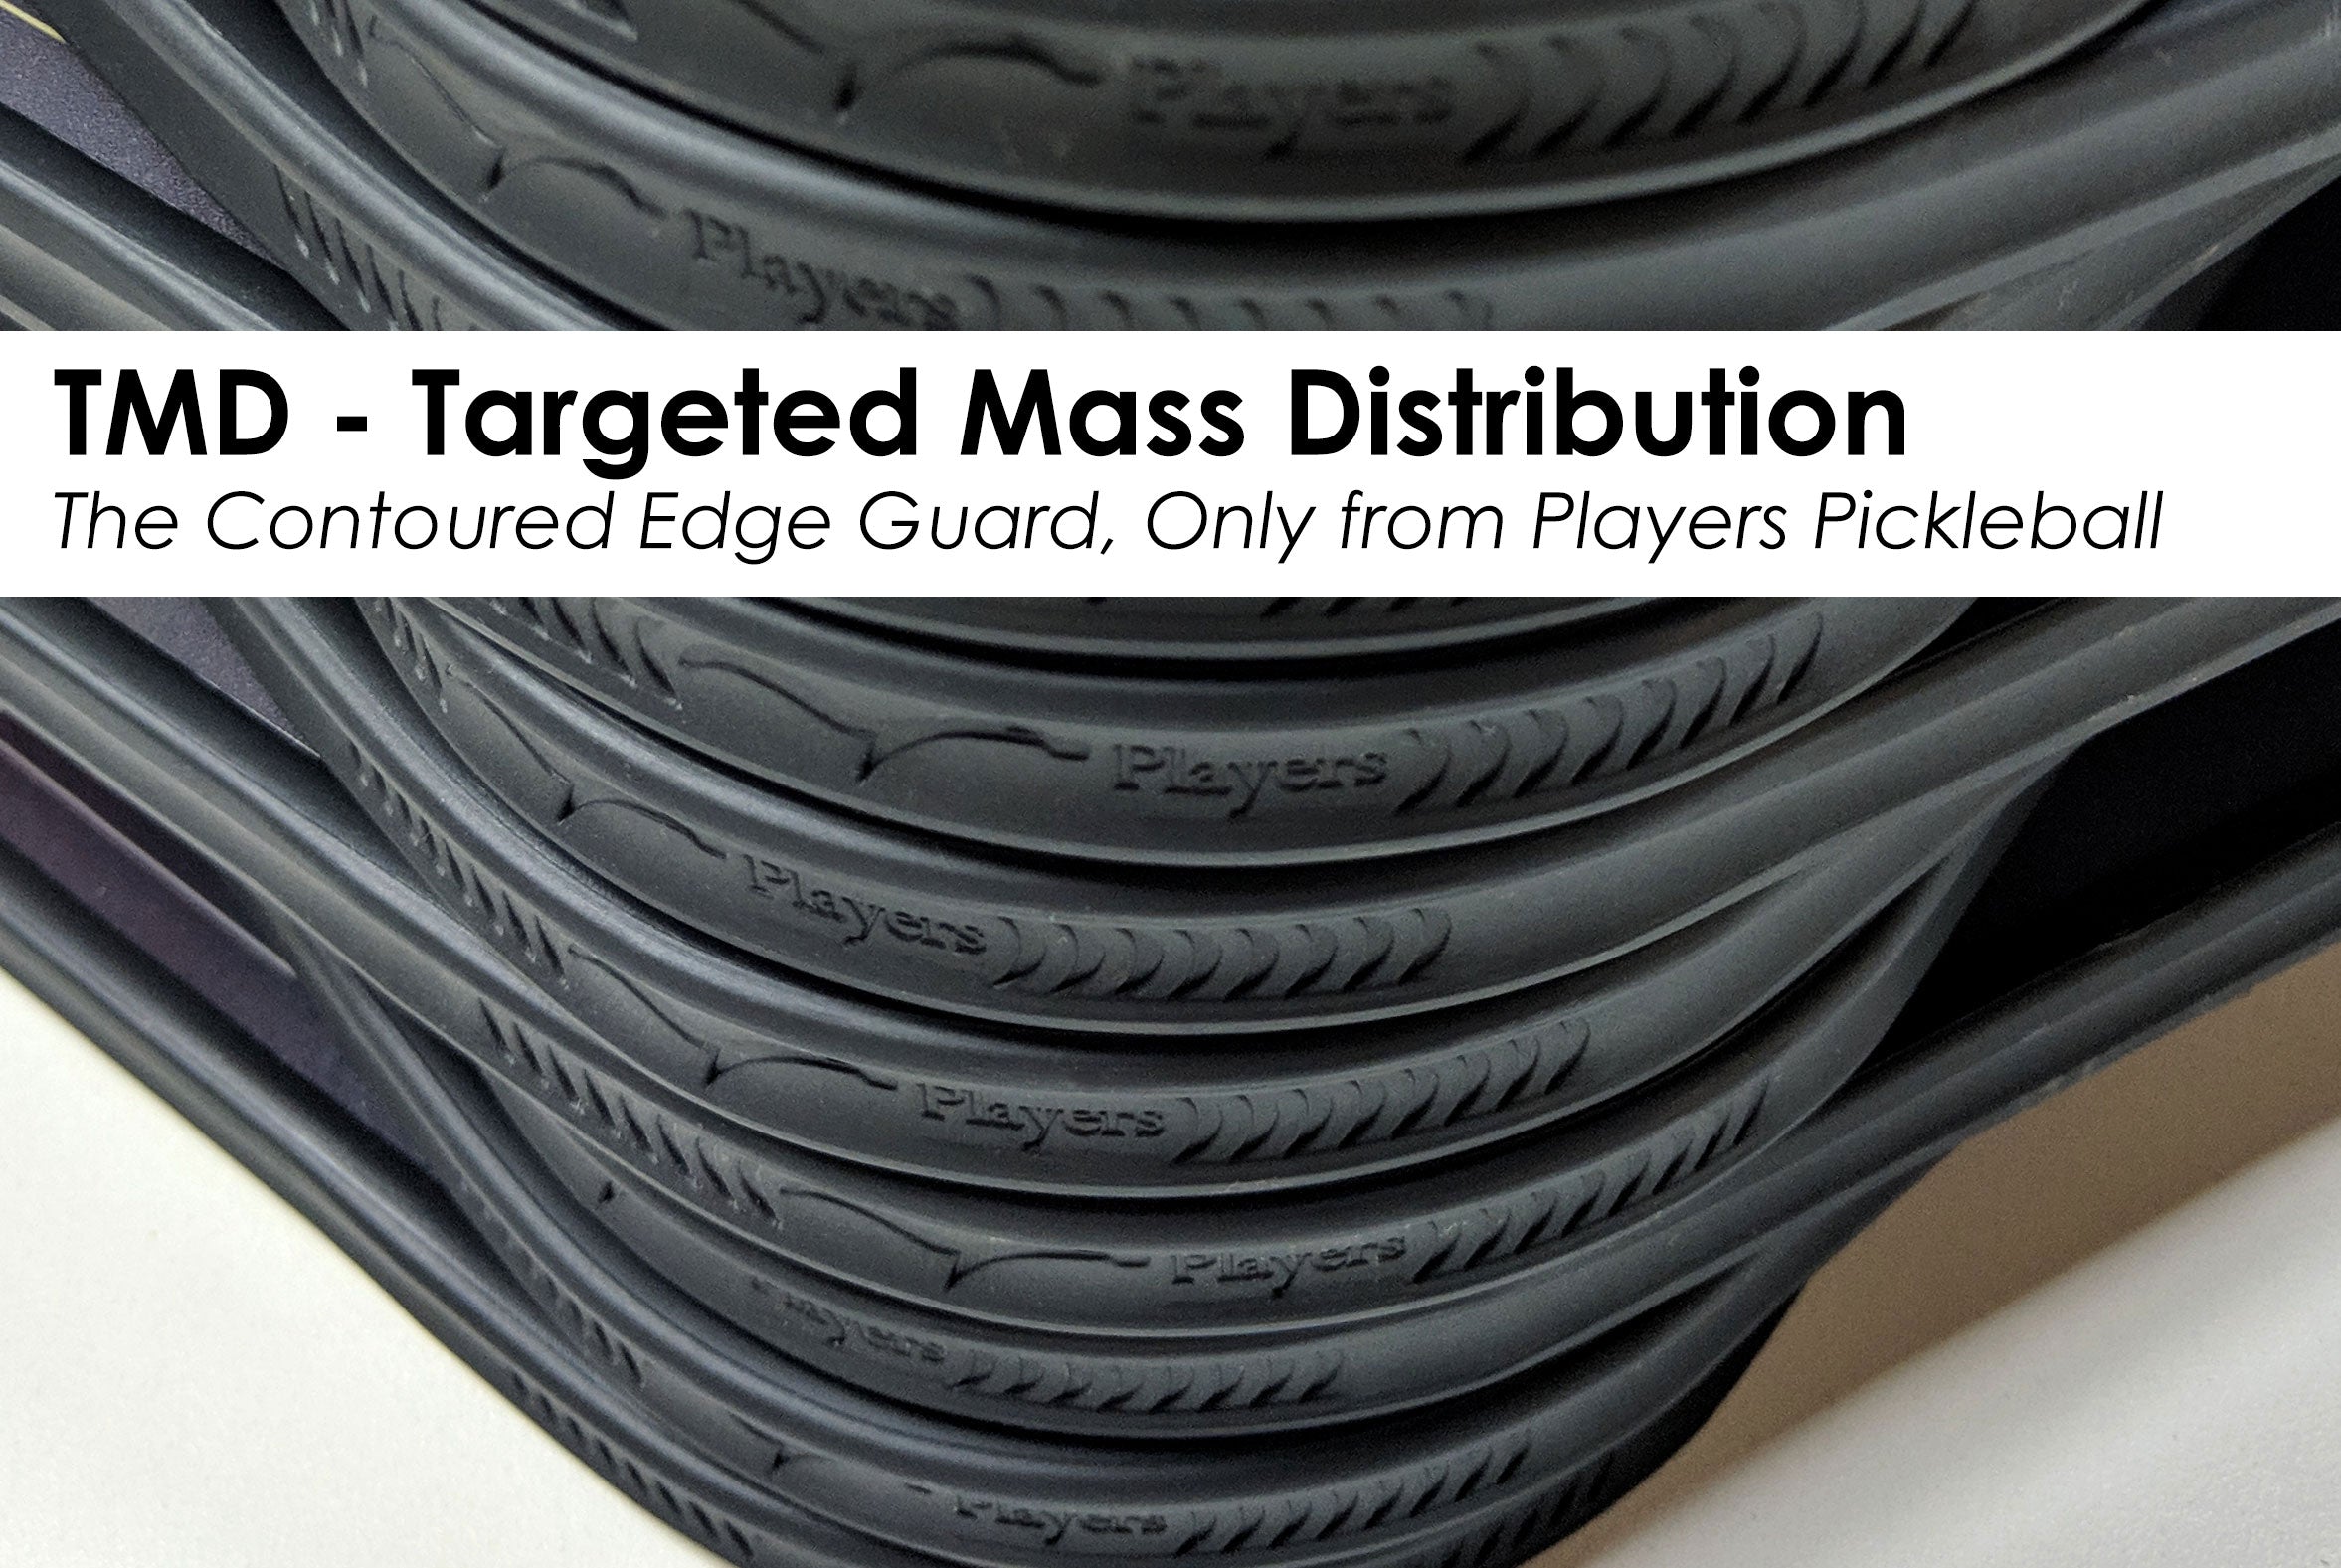 TMD - "Targeted Mass Distribution" & The Contoured Edge Guard